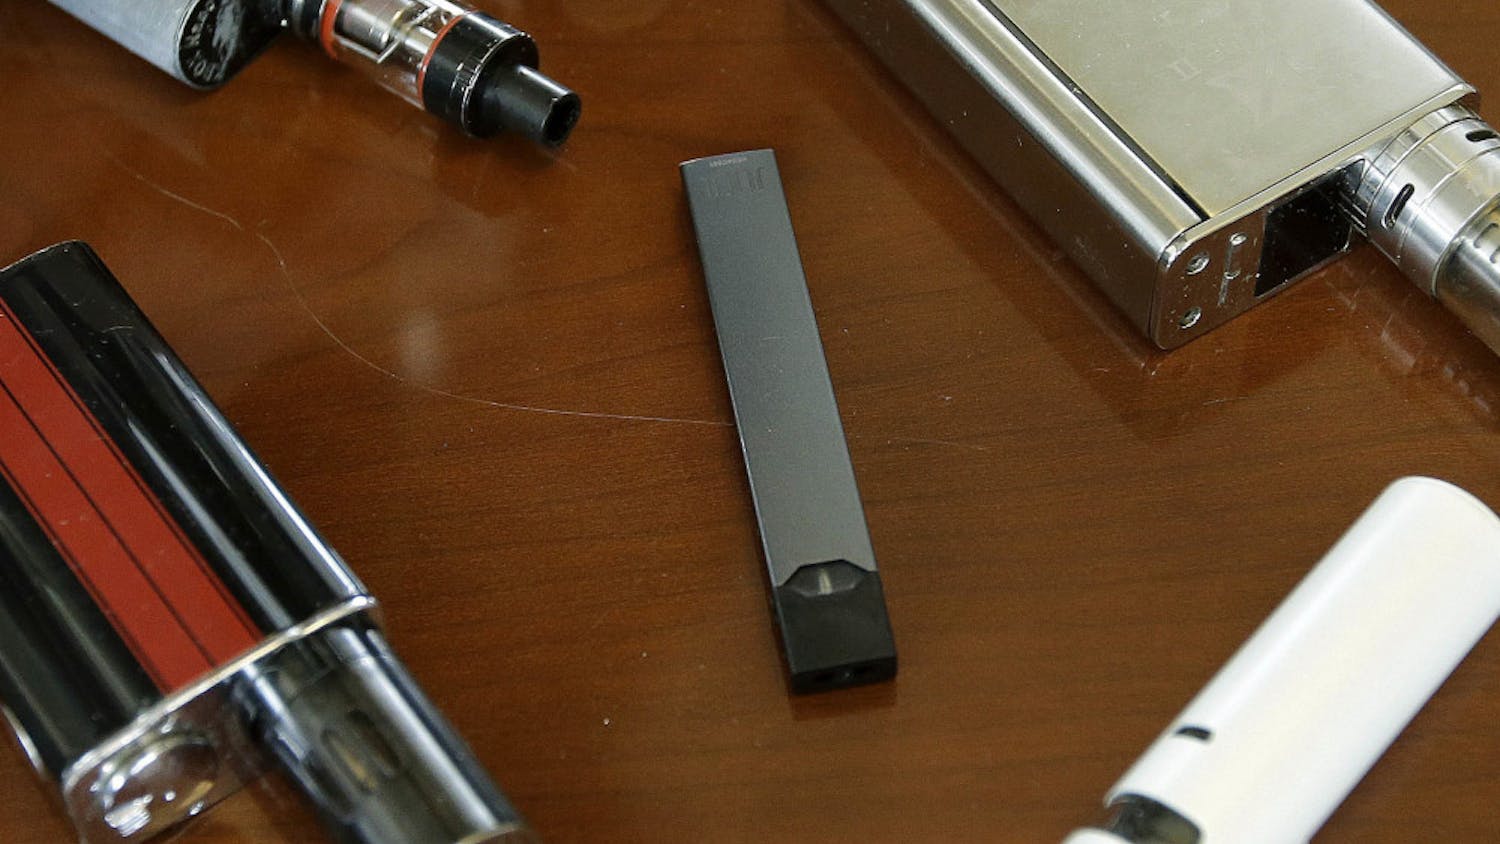 This Tuesday, April 10, 2018 file photo shows vaping devices, including a Juul, center, that were confiscated from students at a high school in Marshfield, Mass. On Tuesday, Nov. 13, 2018, San Francisco-based Juul Labs Inc. announced it had stopped filling orders for its mango, fruit, creme and cucumber pods but not menthol and mint. It will sell all flavors through its website and limit sales to those 21 and older. (AP Photo/Steven Senne)